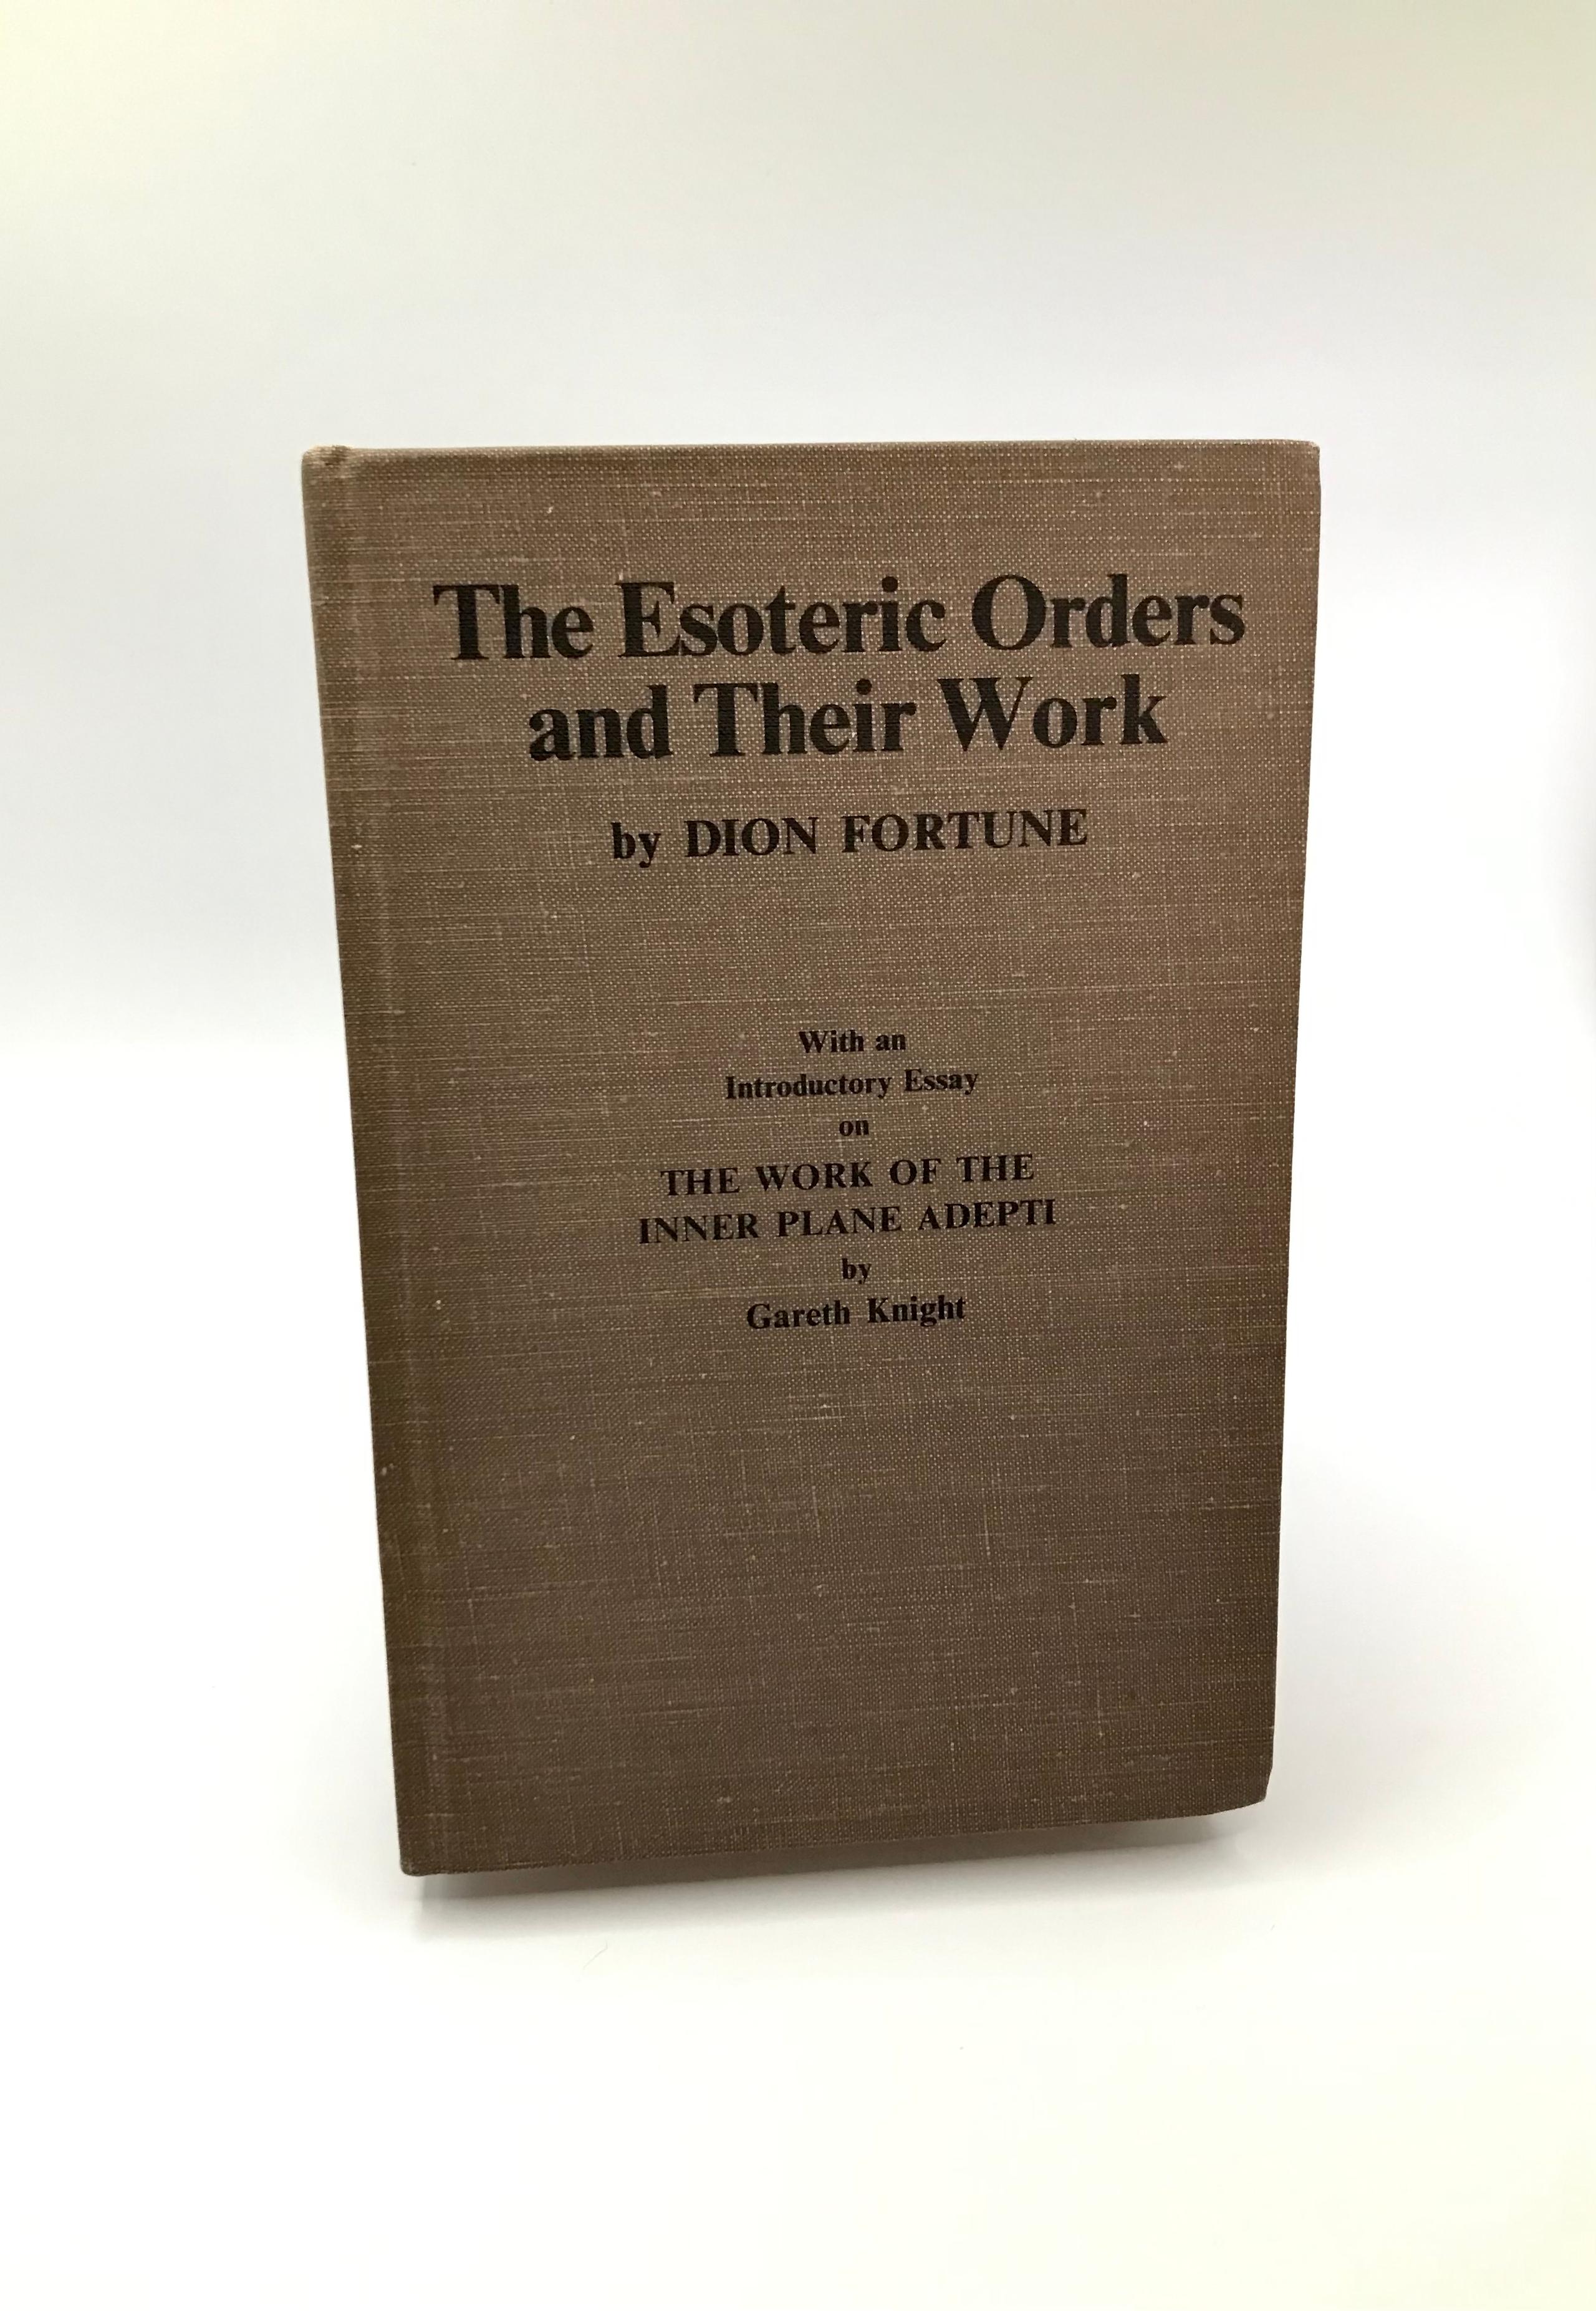 The Esoteric Orders and Their Work by Dion Fortune